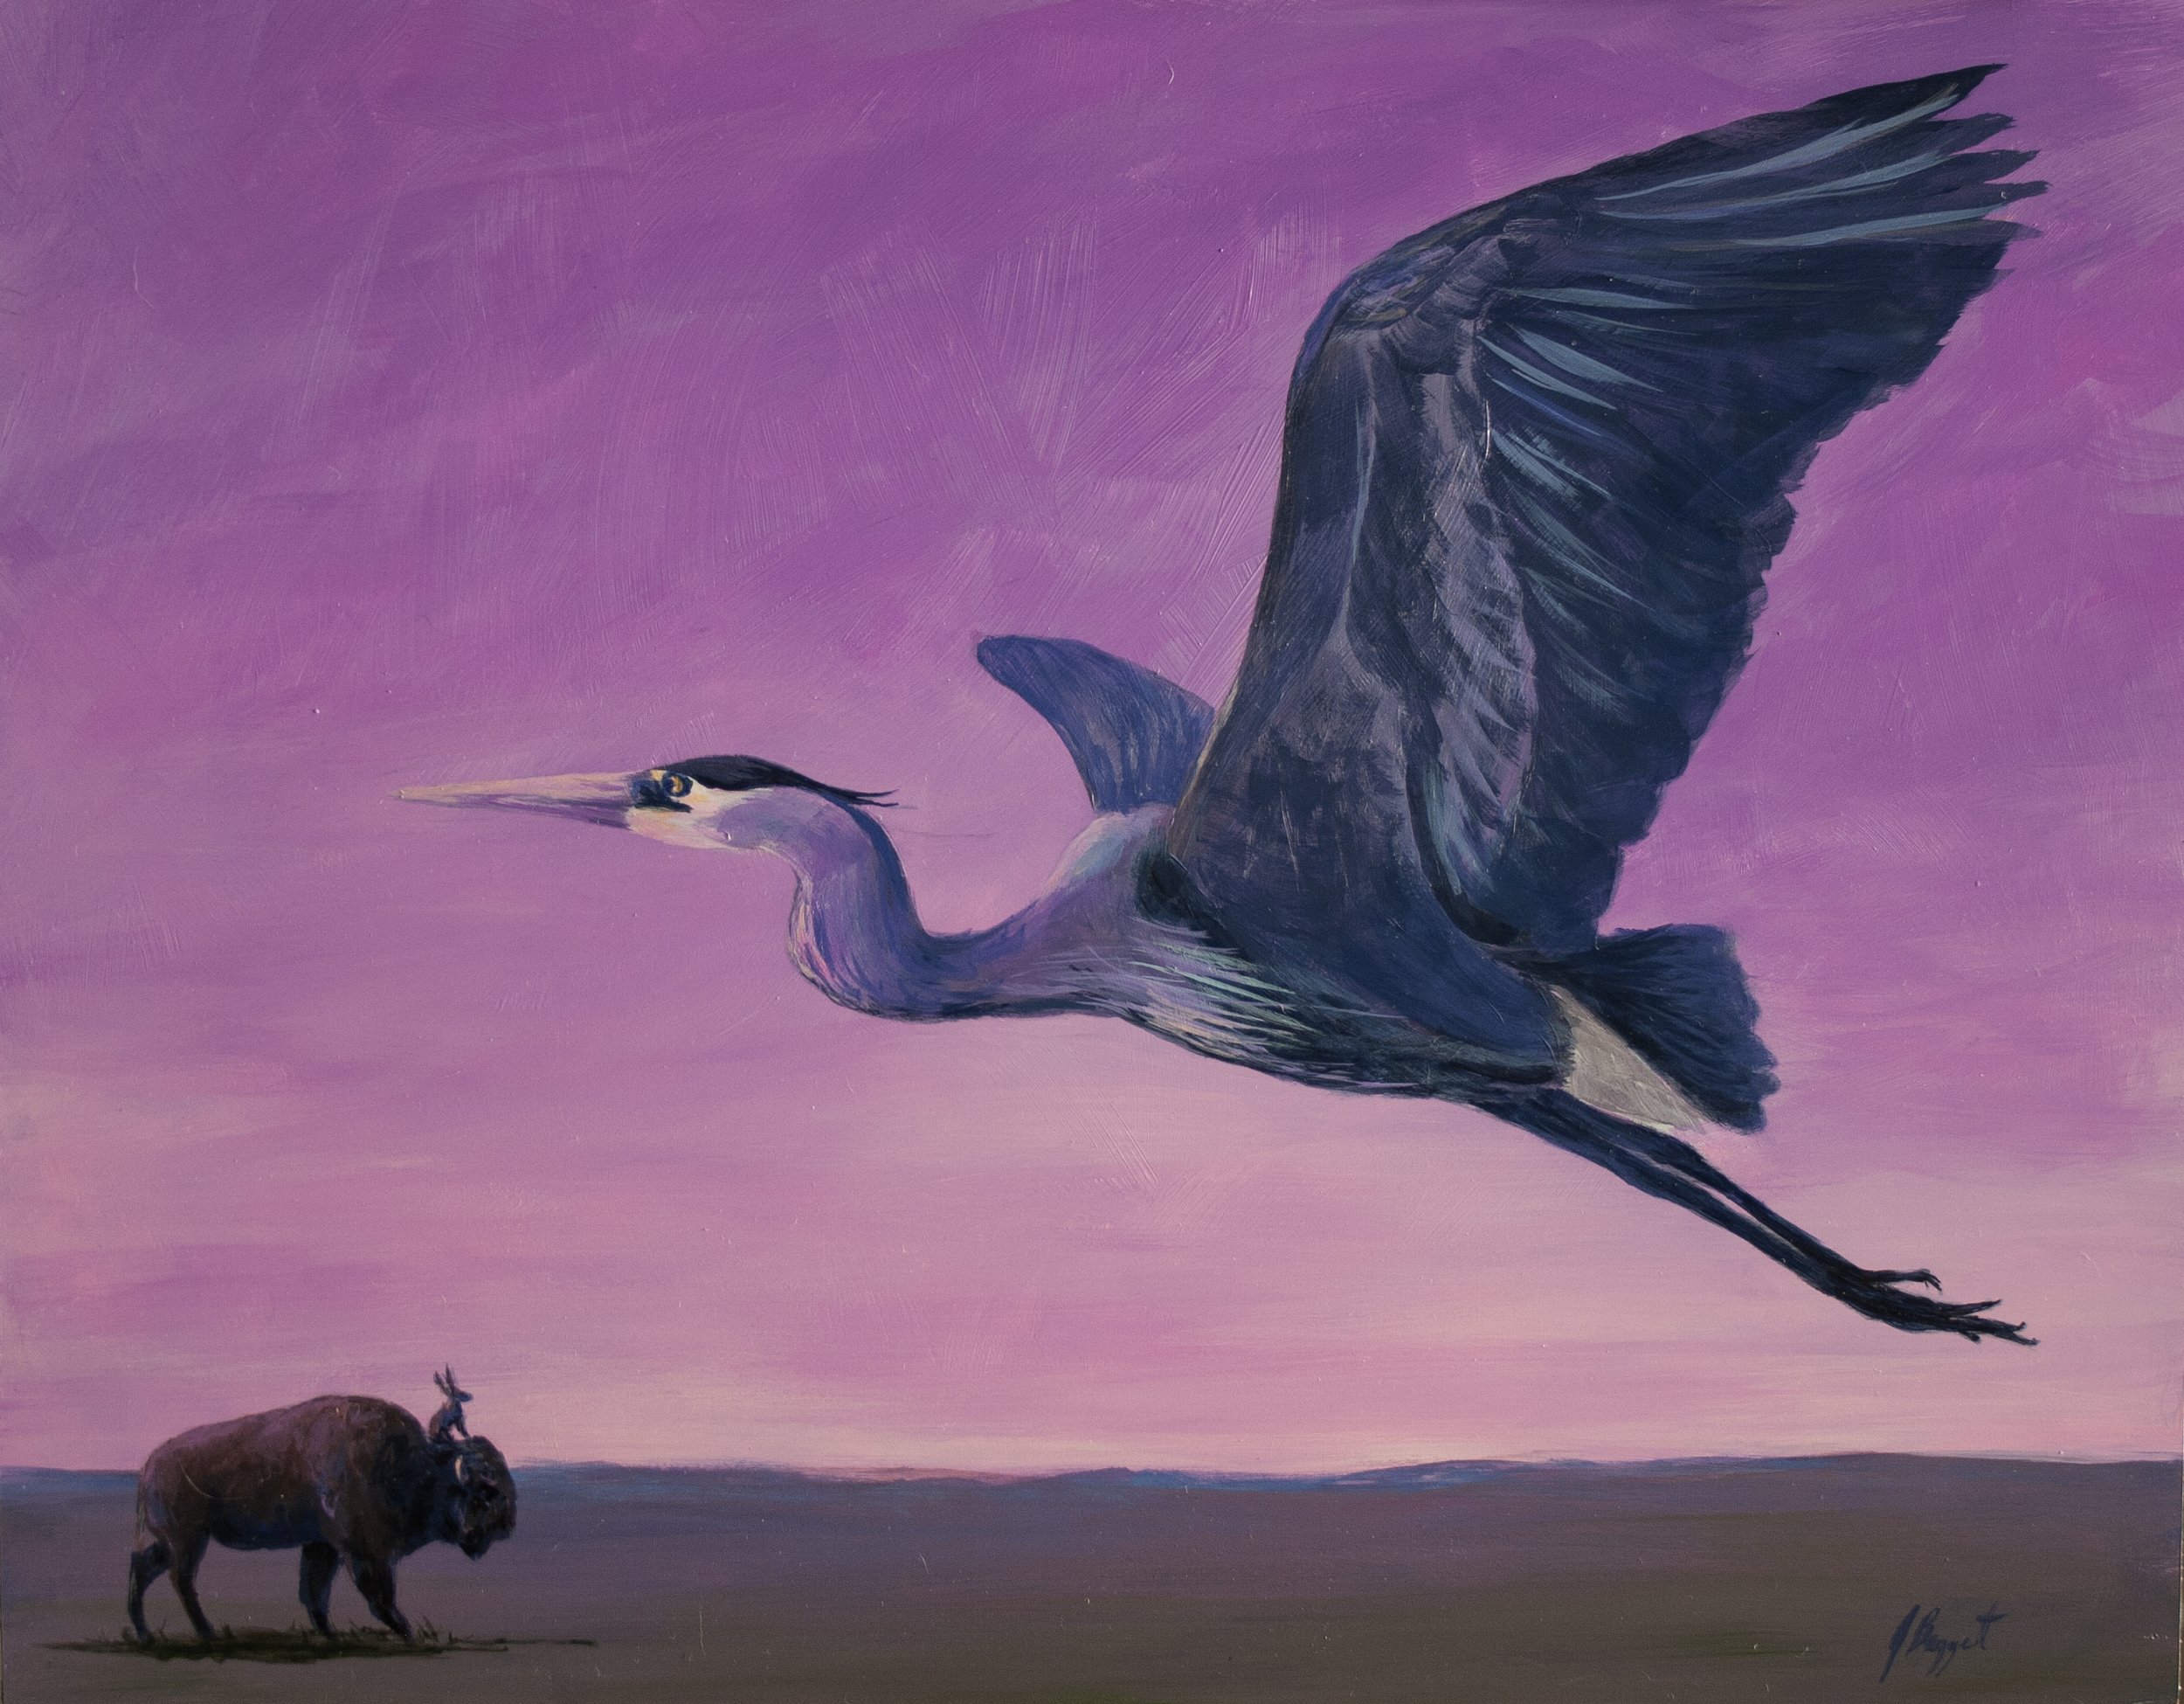 Jesse Baggett, “Boon of the Heron” 